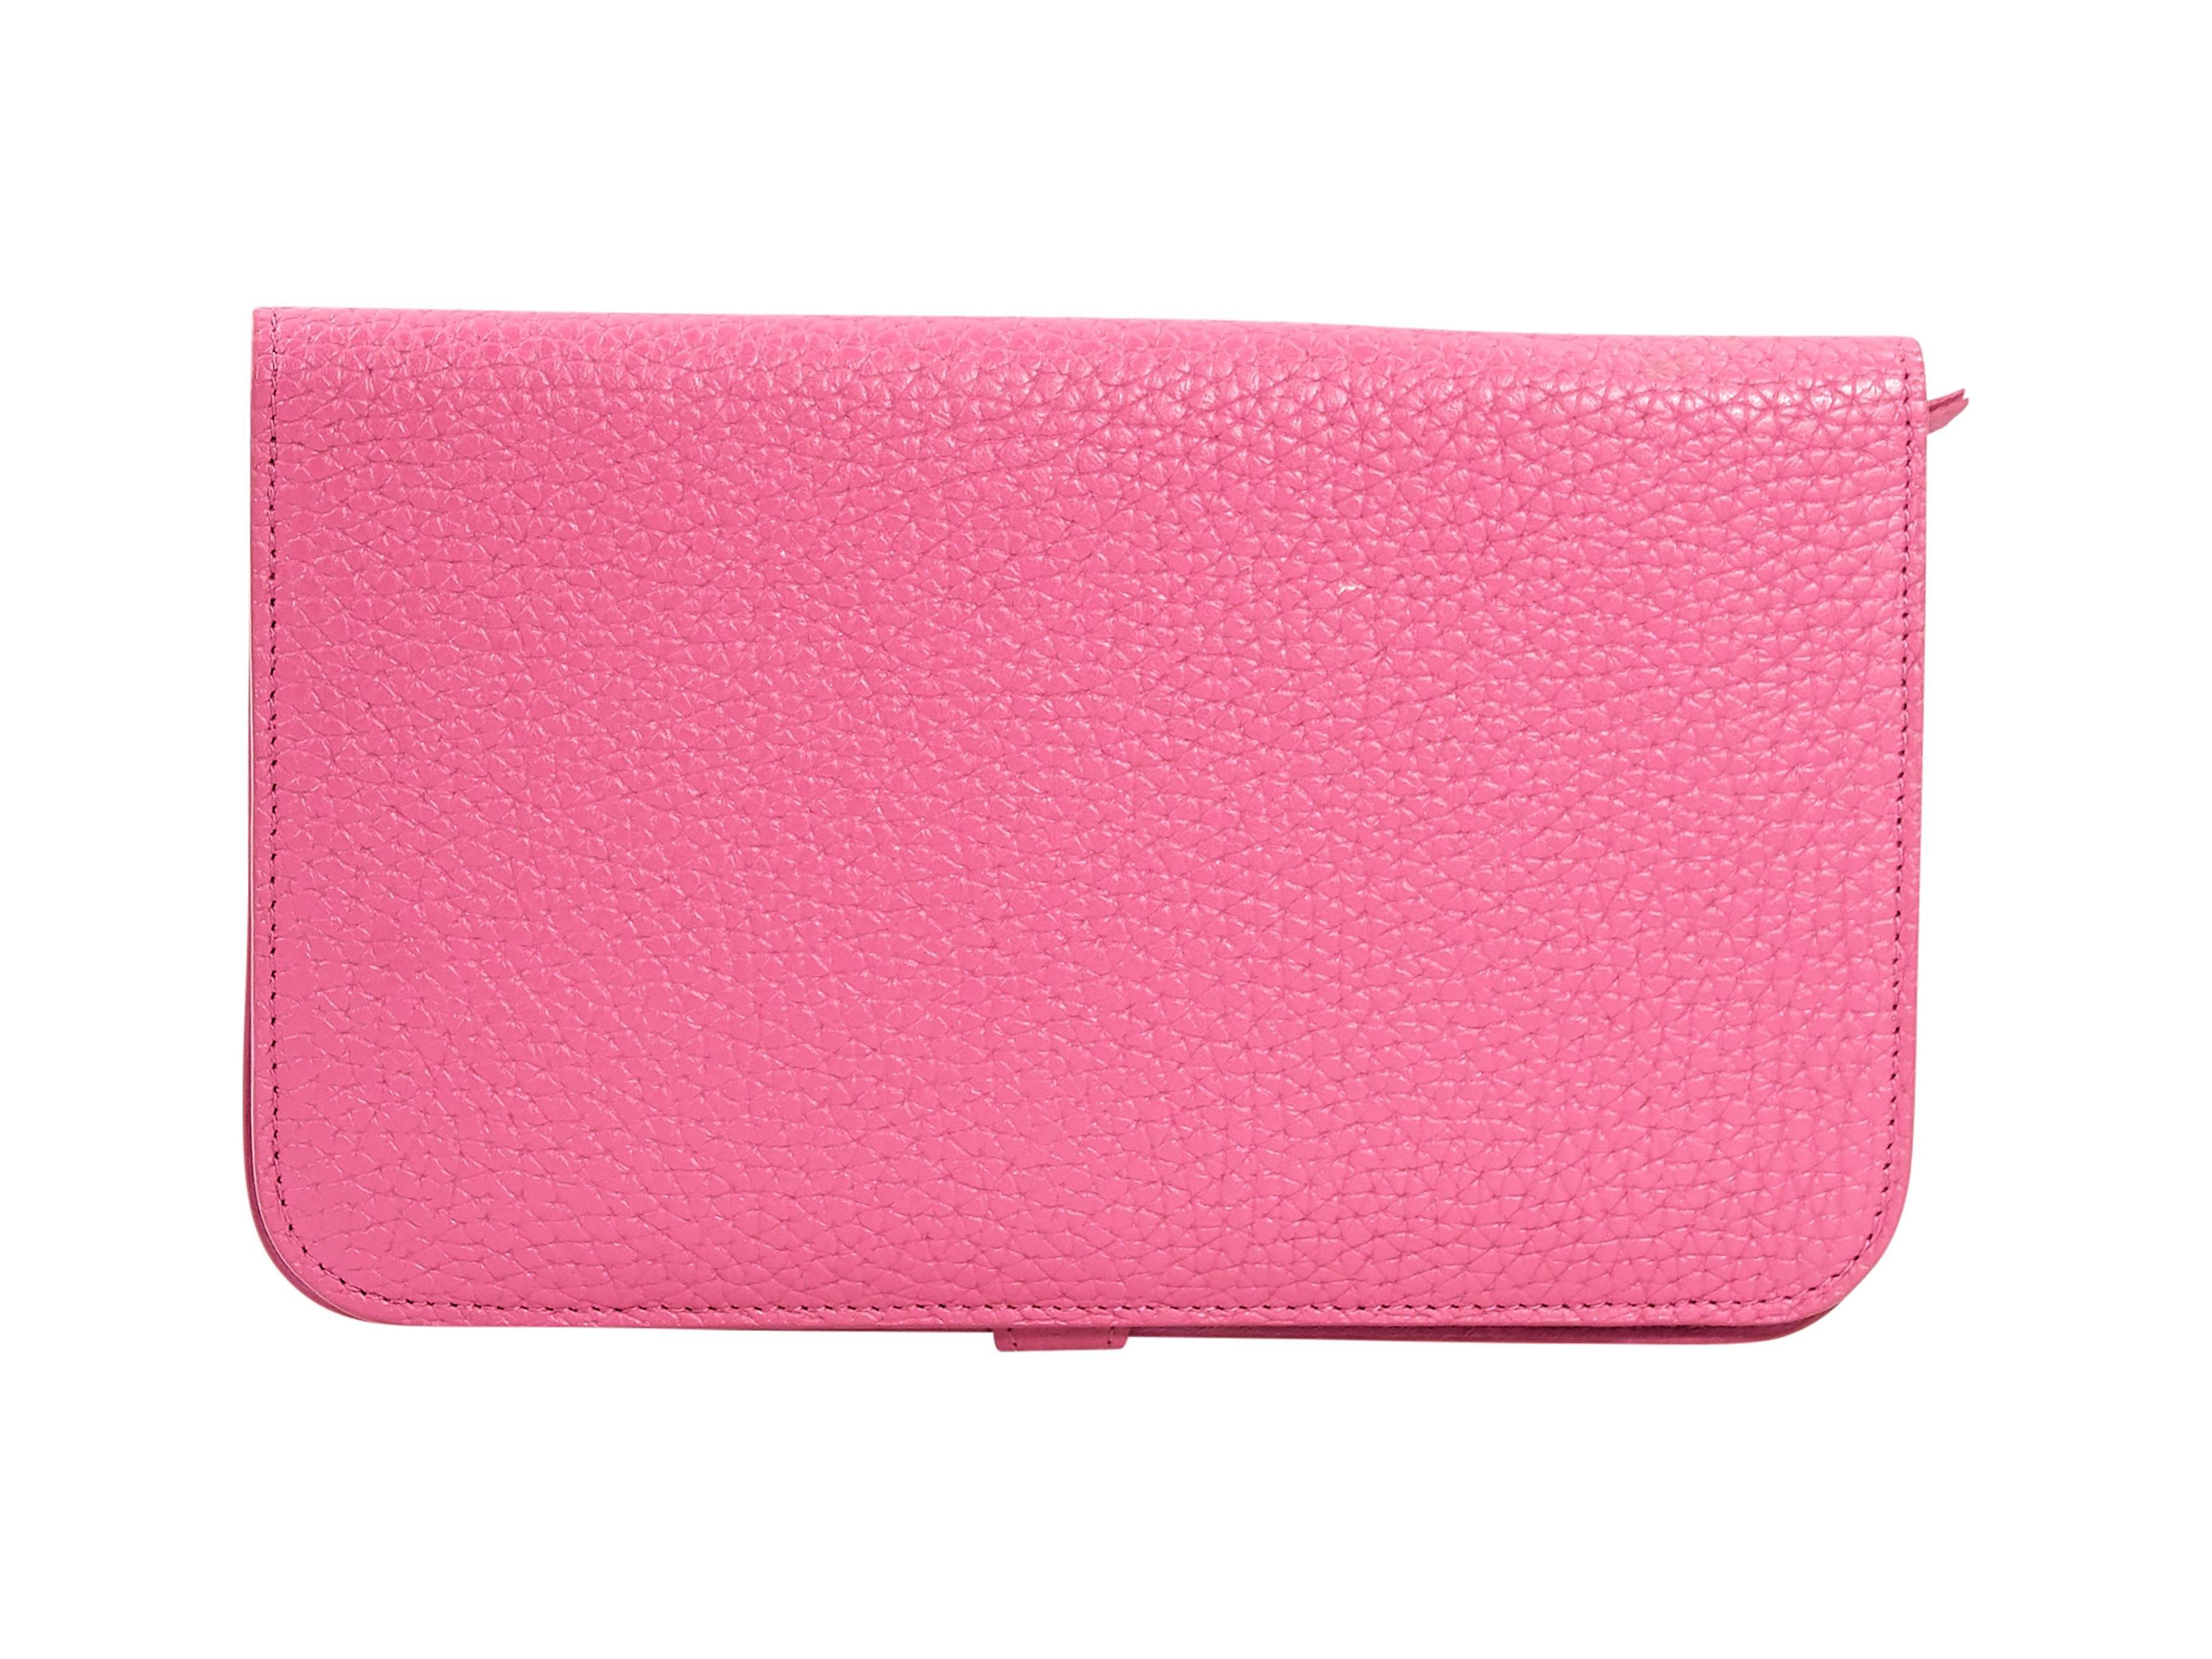 Product details:  Pink pebbled leather Togo Dogon combined wallet by Hermès.  Tab closure.  Silvertone hardware.  Leather interior with inner credit card slots, bill compartment and zip pouch.  Original box included.  5